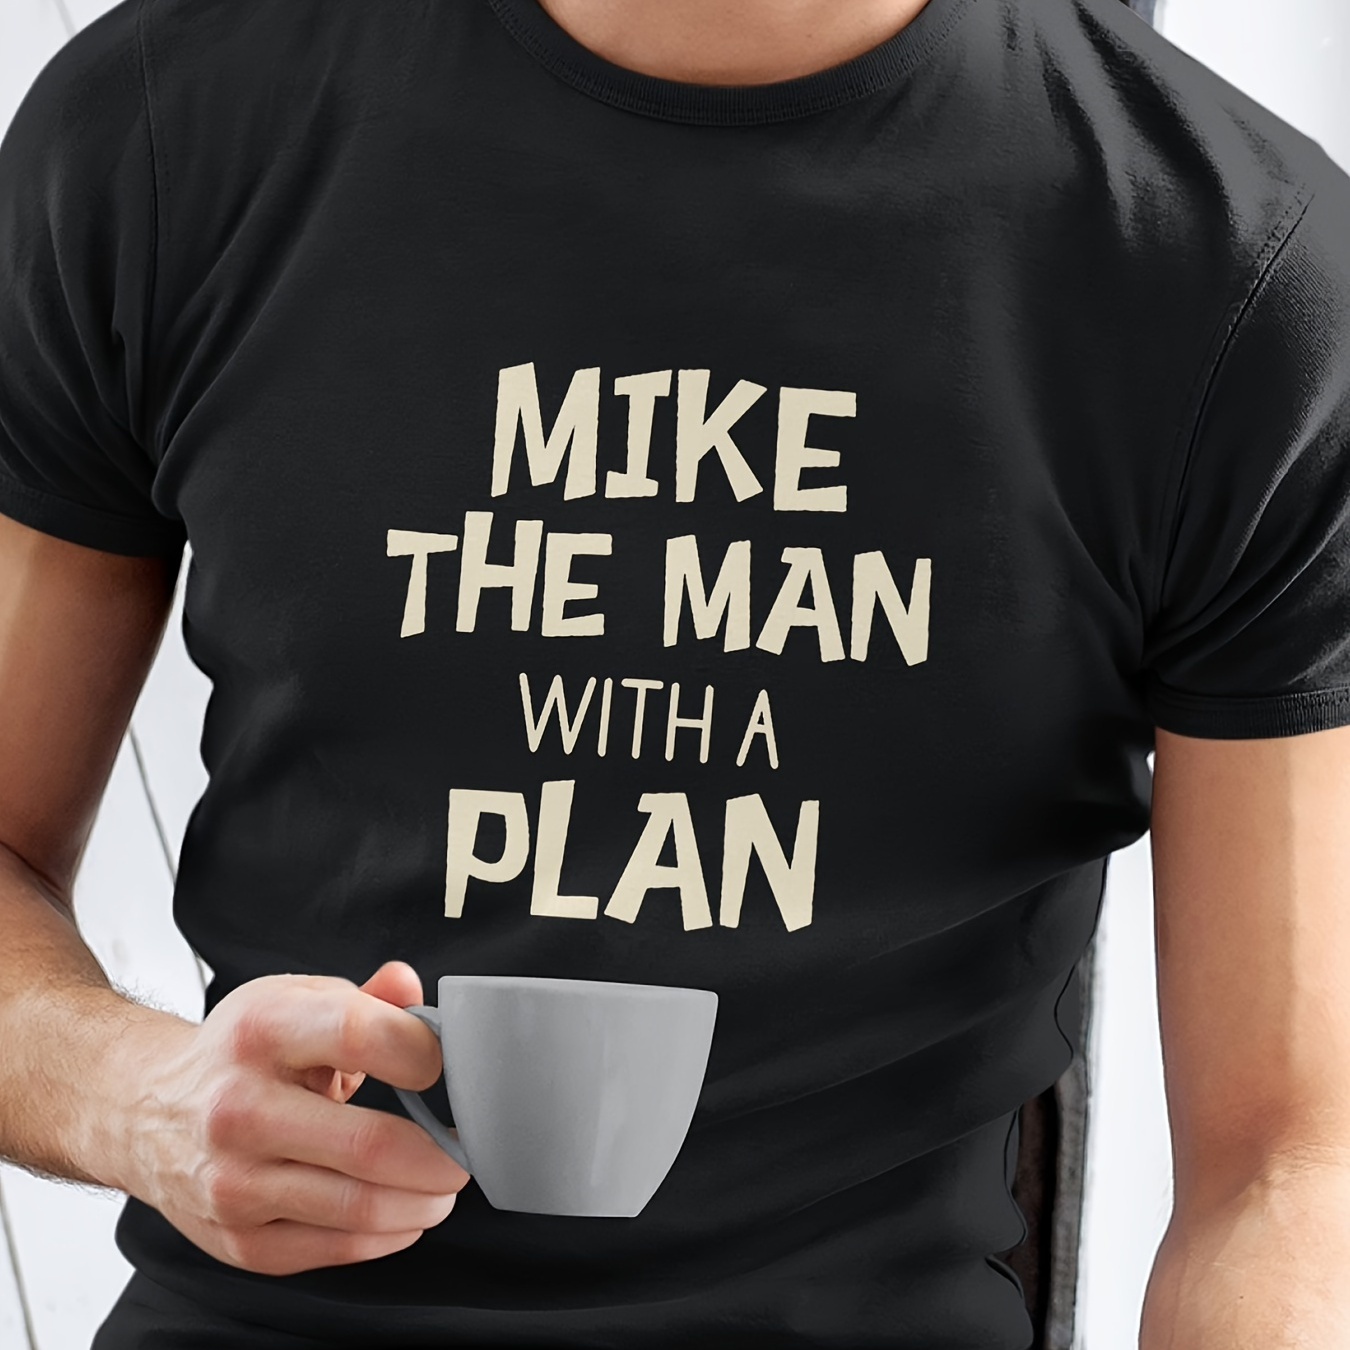 

Mike The Man With A Plan Print Mens Stylish Graphic Print T-shirt - Comfortable Casual Wear With Eye-catching Designs - High-quality Short Sleeve Tees For Everyday Fashion